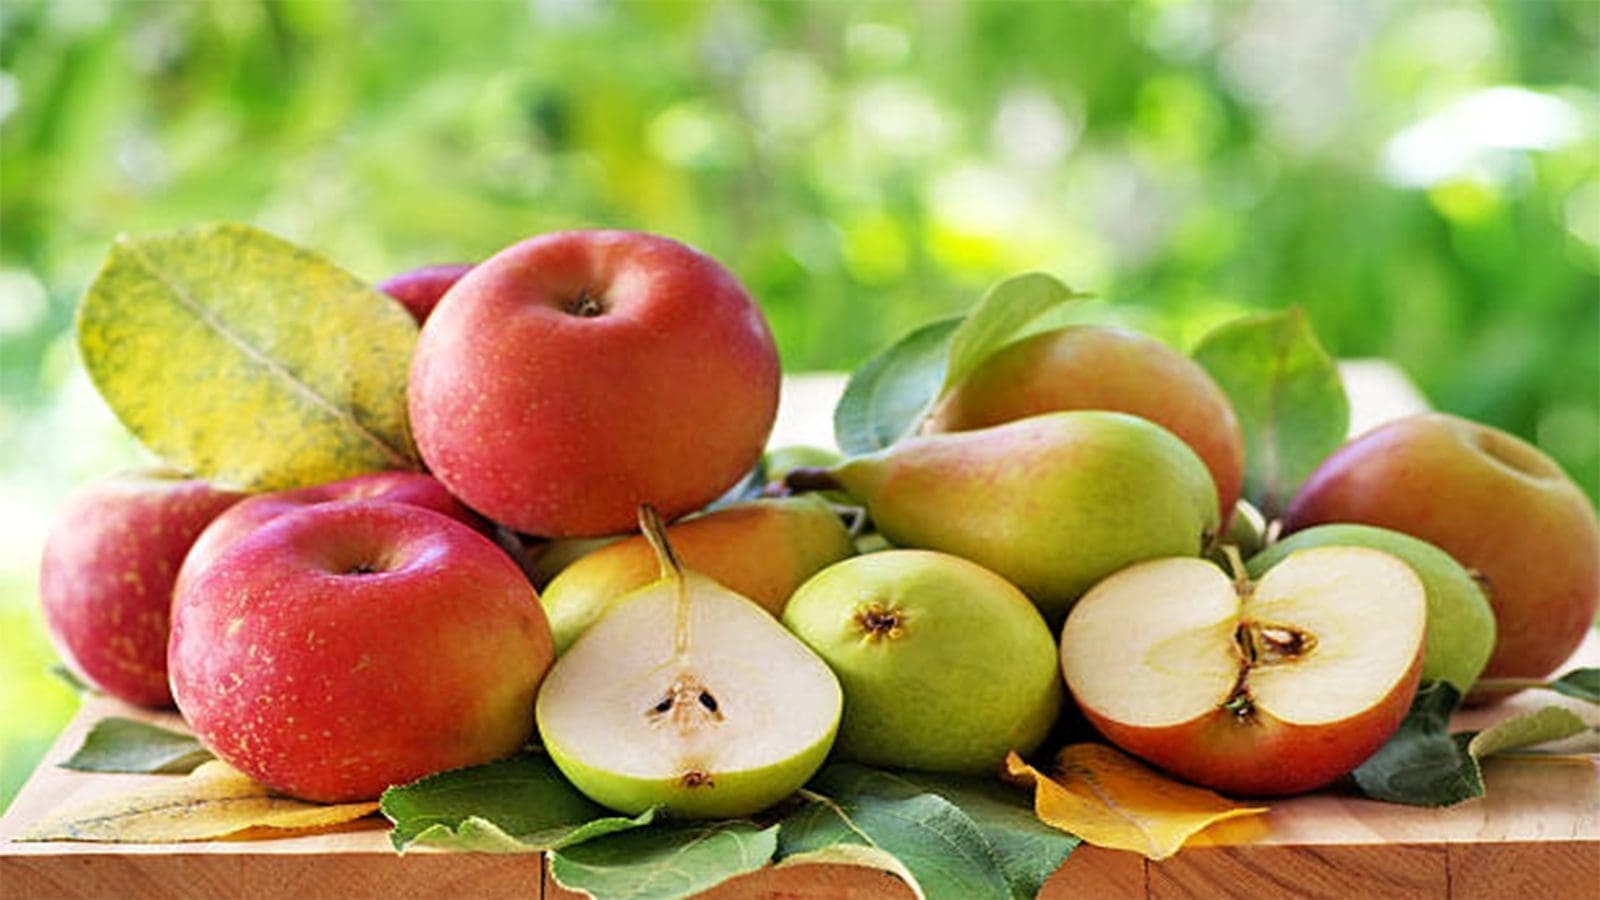 India green-lights in-transit cold treatment for South African apples, pears